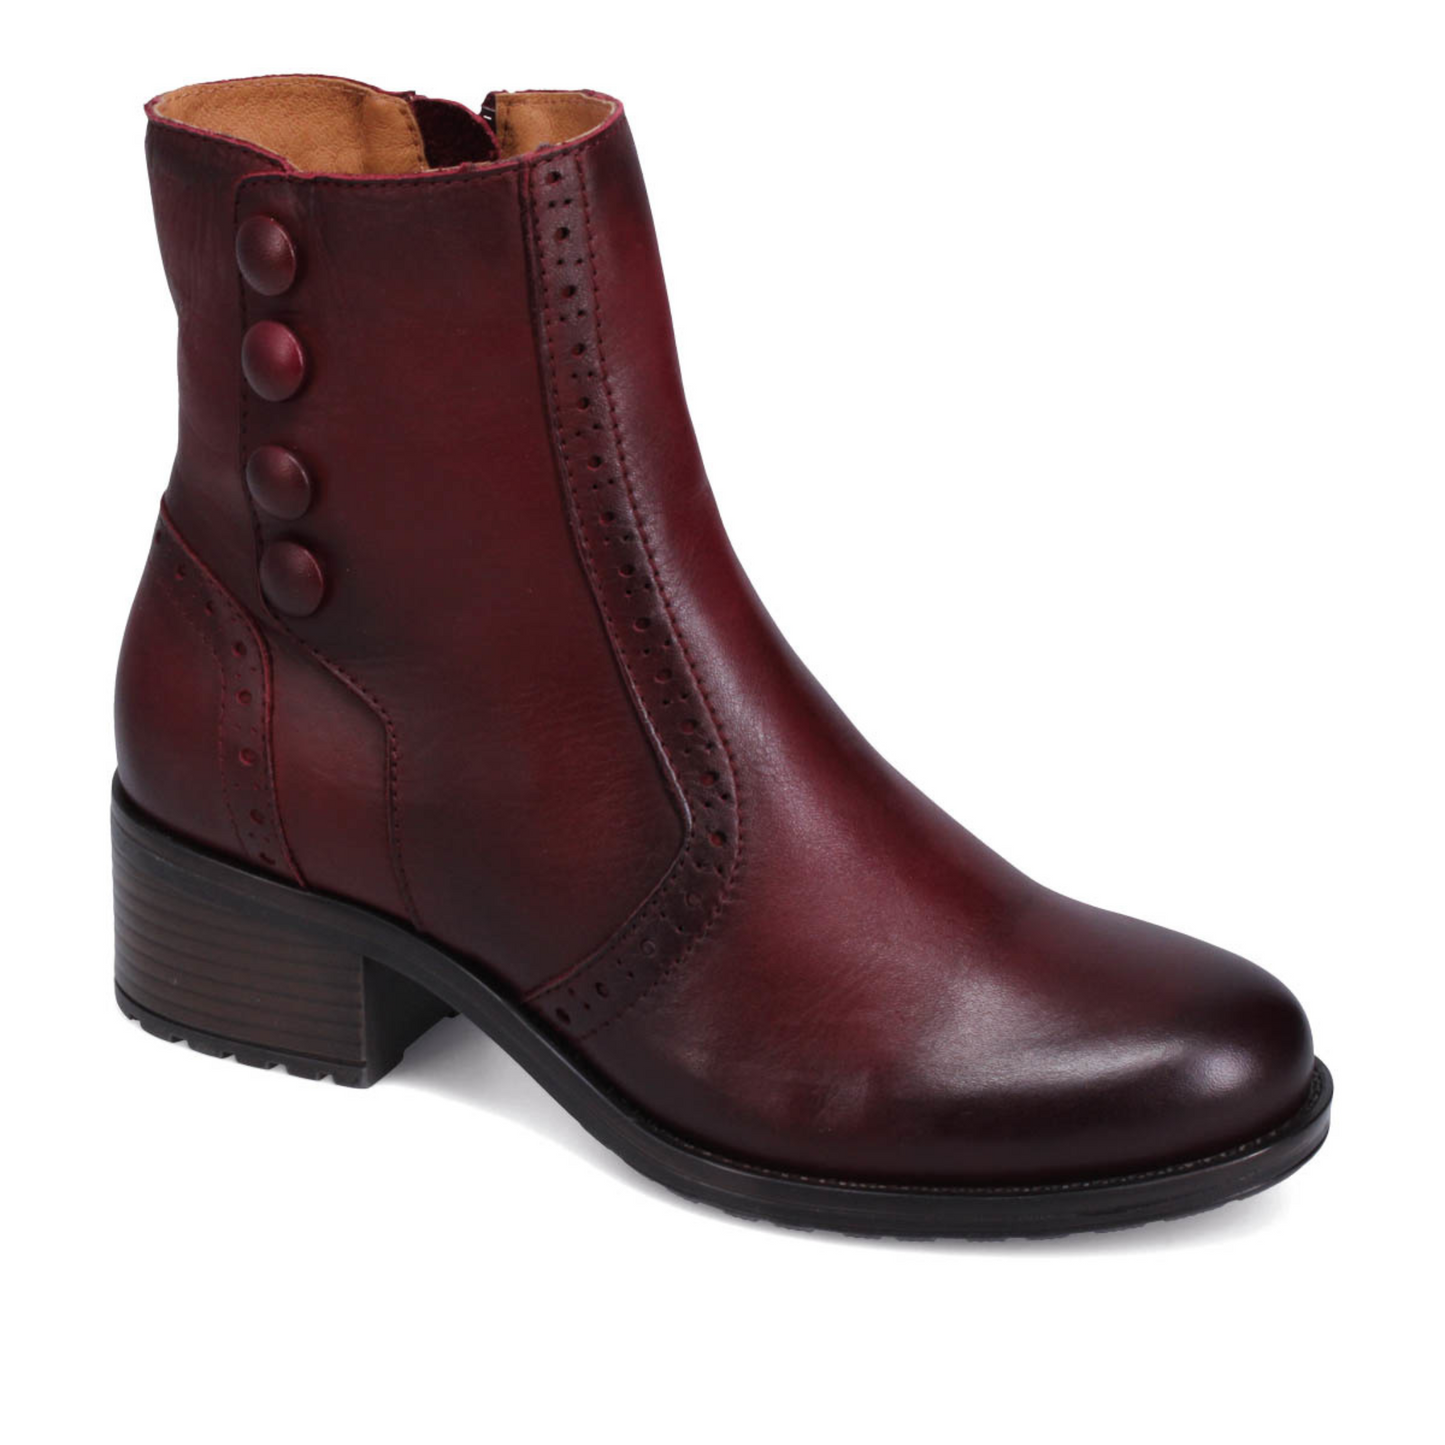 Front angled profile of the Miz Mooz Jake Boot in the colour Bordeaux.